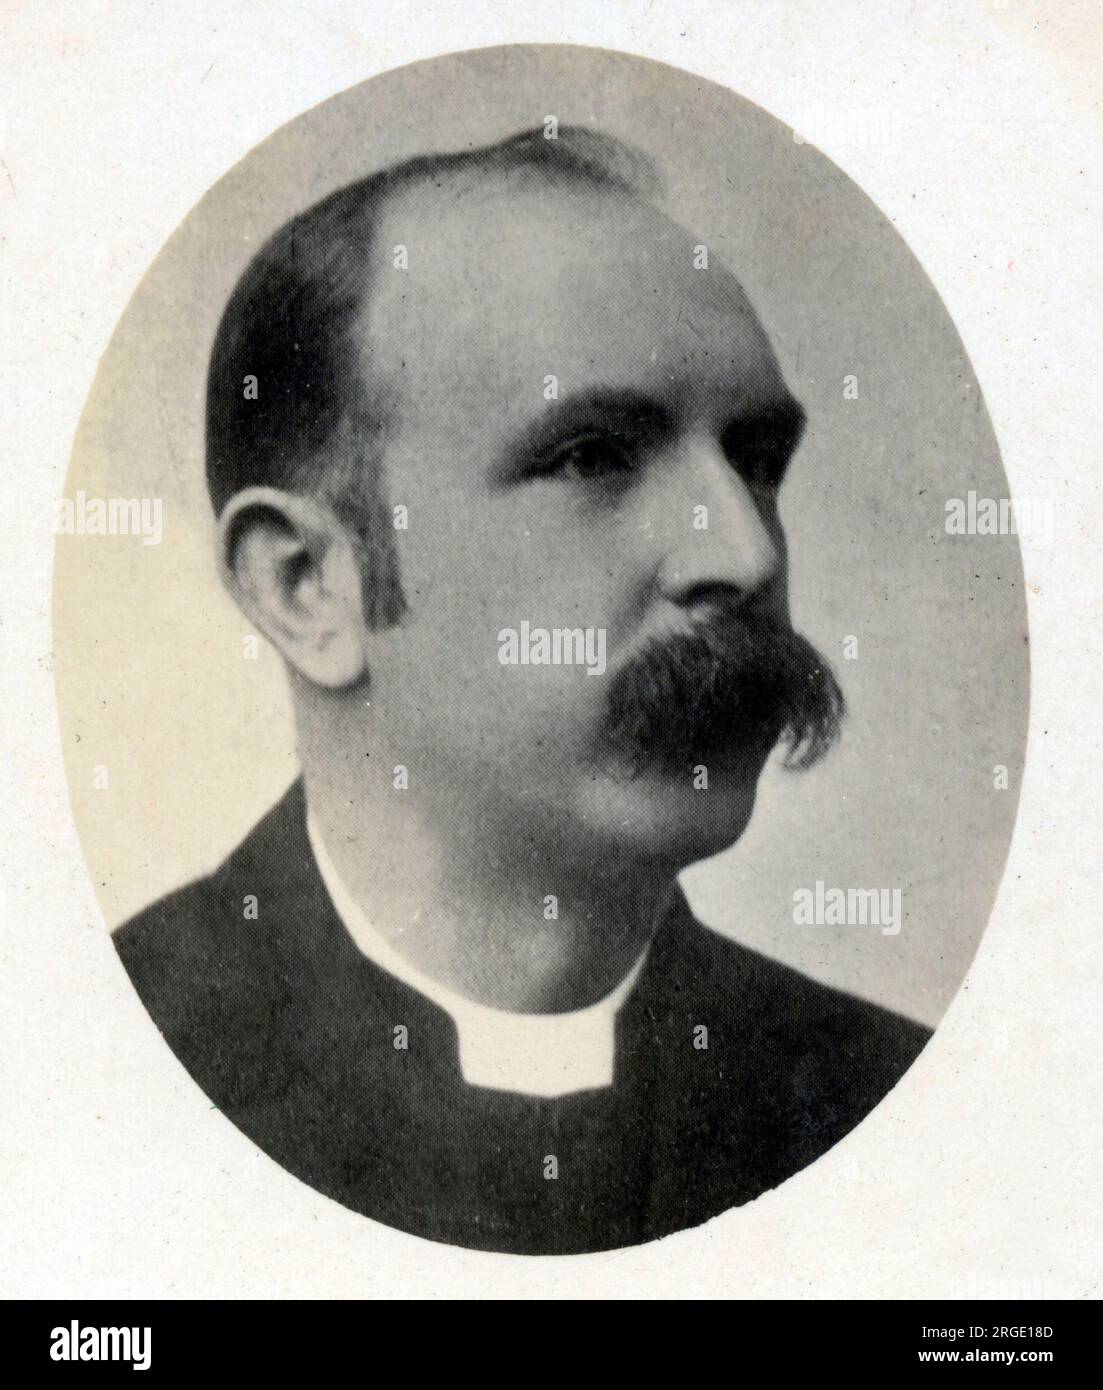 A Moustachioed Member of the Clergy - England. Stock Photo